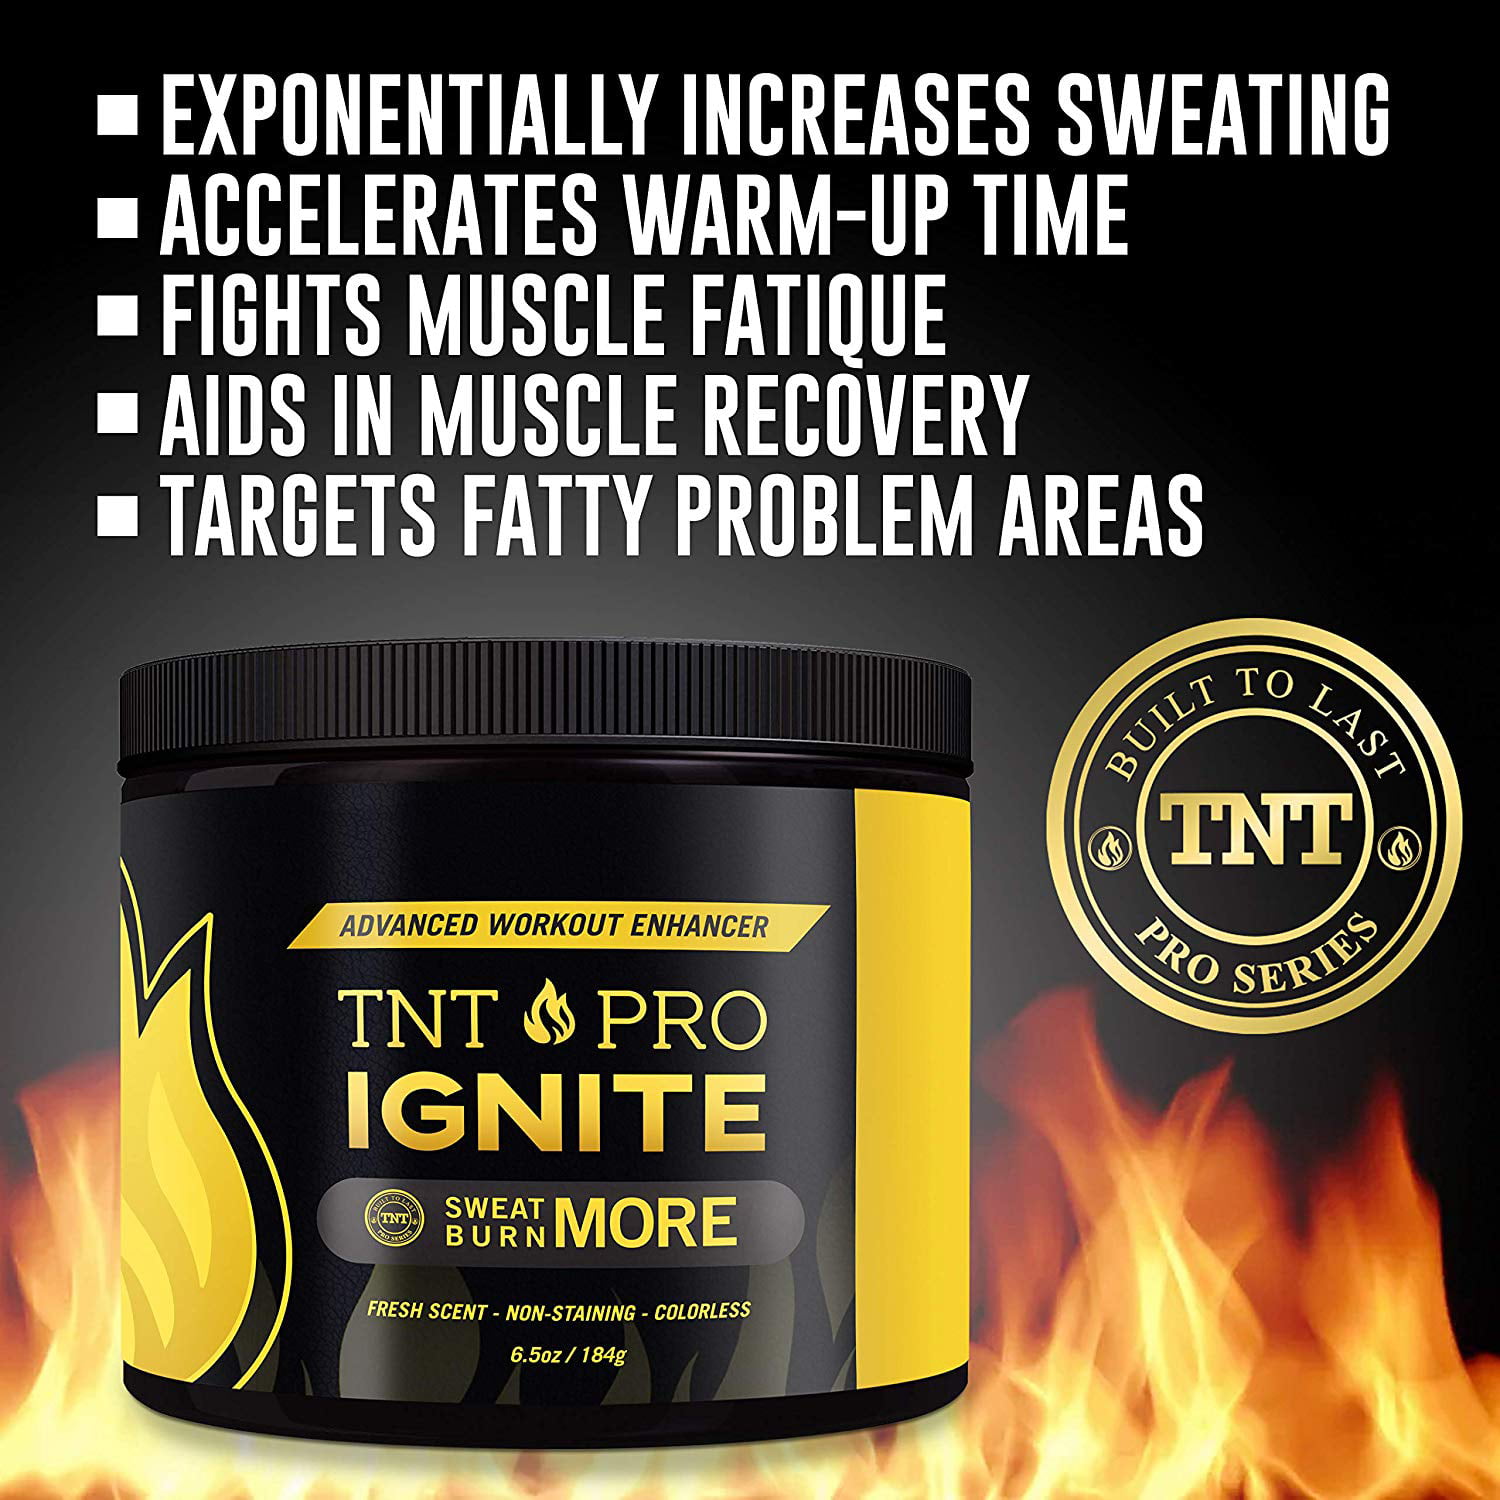 6.5 oz Jar TNT Pro Series Fat Burning Cream for Belly â‚¬â€œ TNT Pro Ignite Sweat Cream for Women and Men â‚¬â€œ Thermogenic Weight Loss Workout Slimming Workout Enhancer